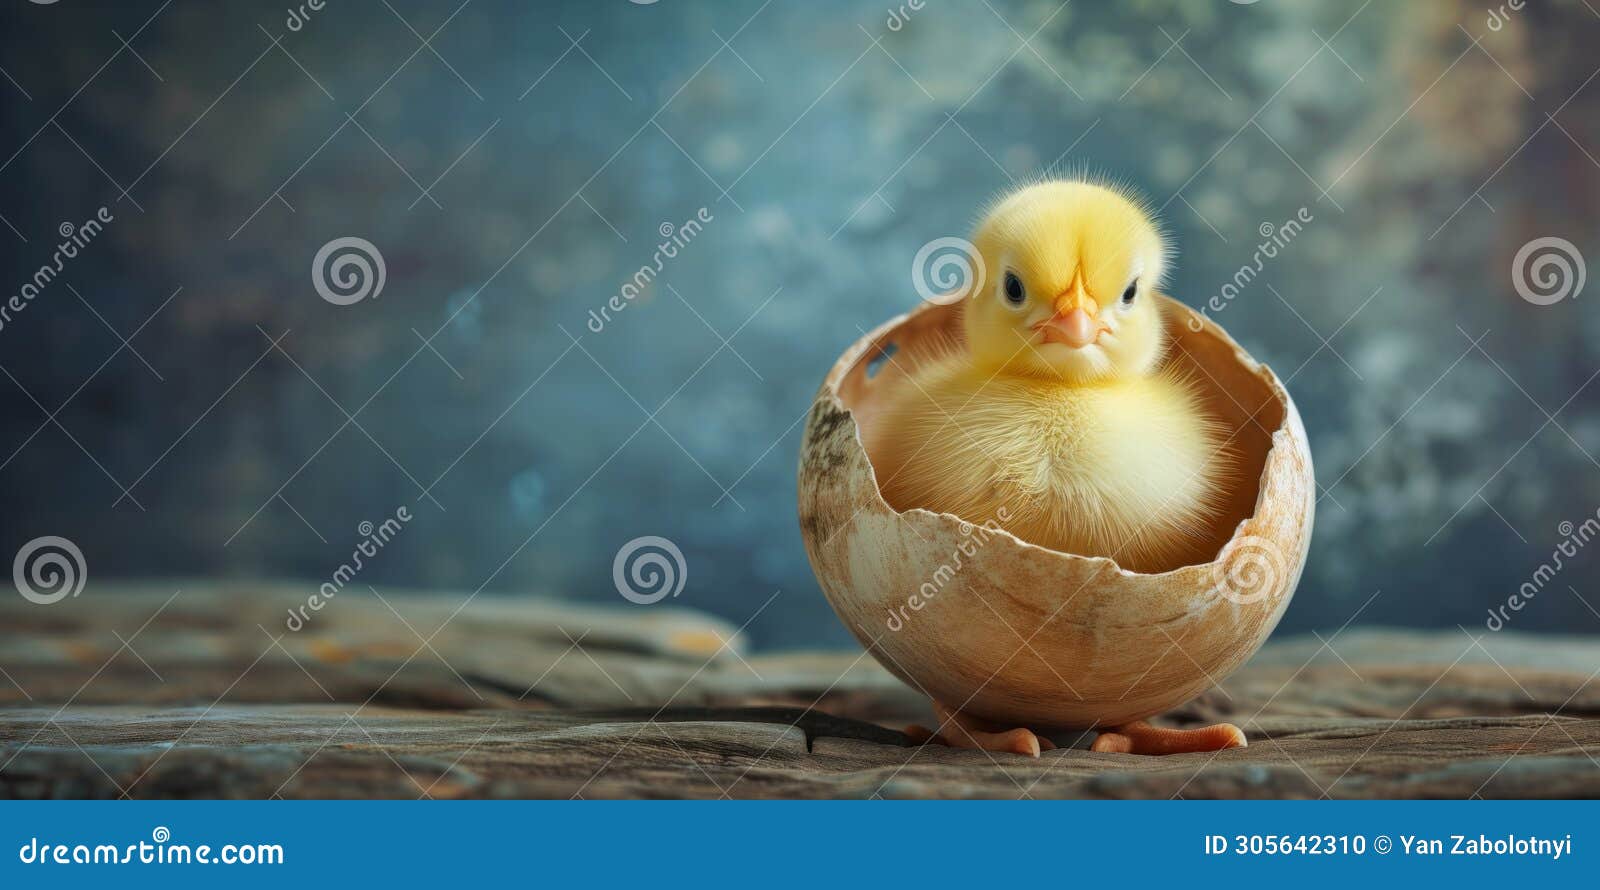 adorable yellow chick emerges from its shell, izing easter joyfulness, copy space